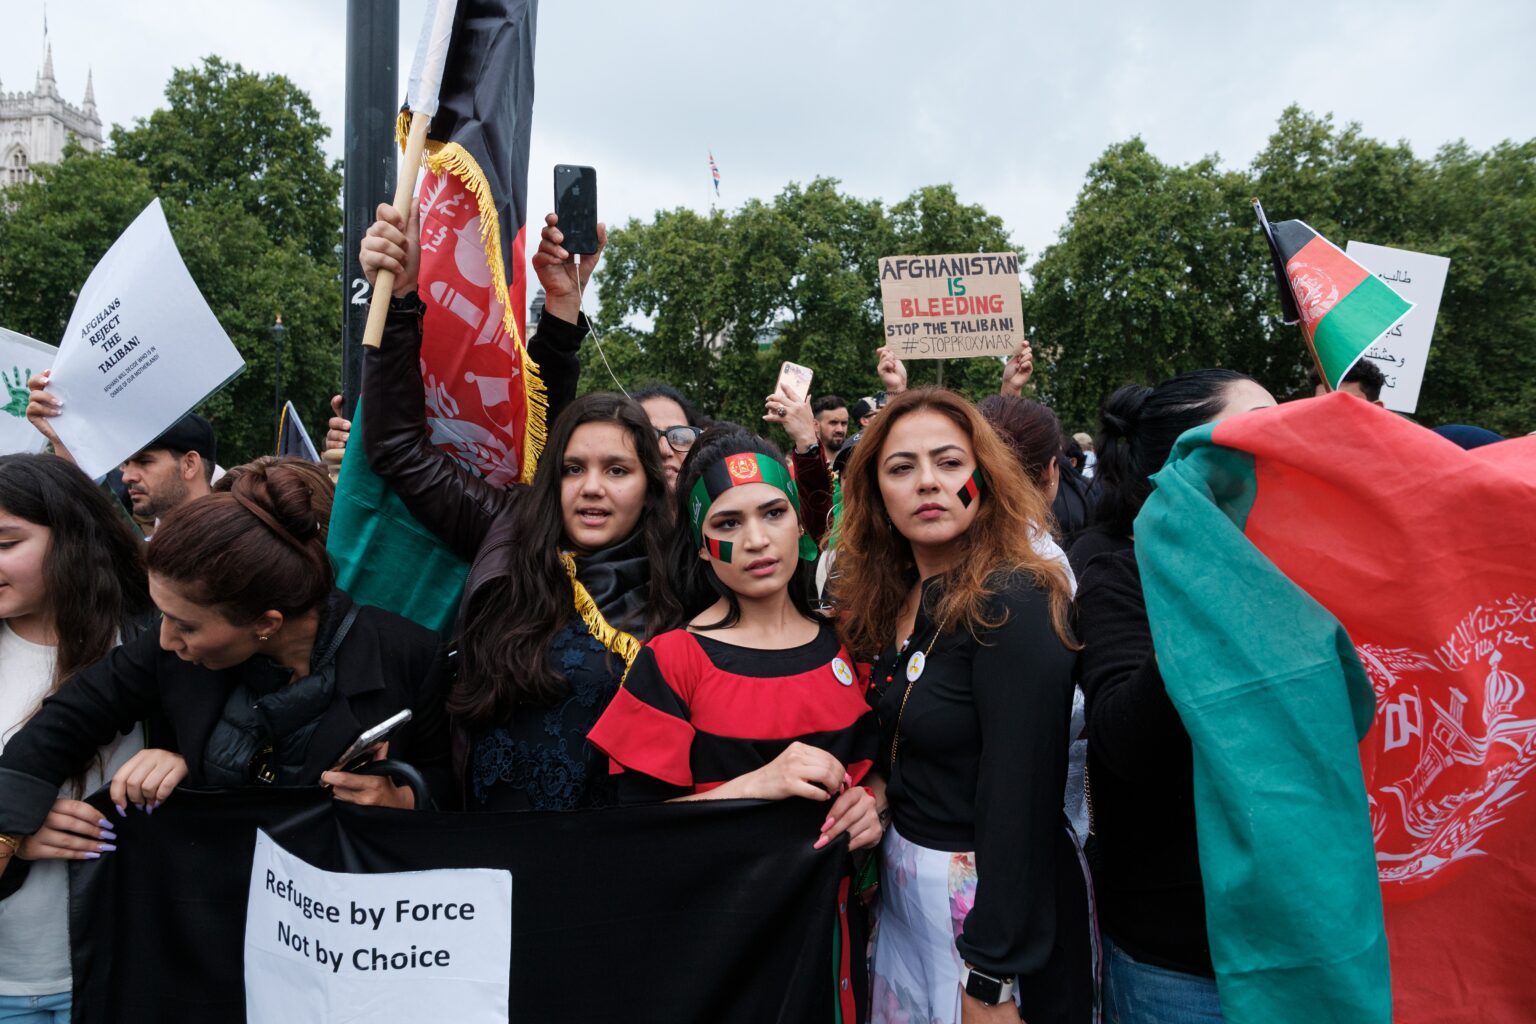 A moment of the Stop Killing Afghan Protest in London where 3 women are standing.